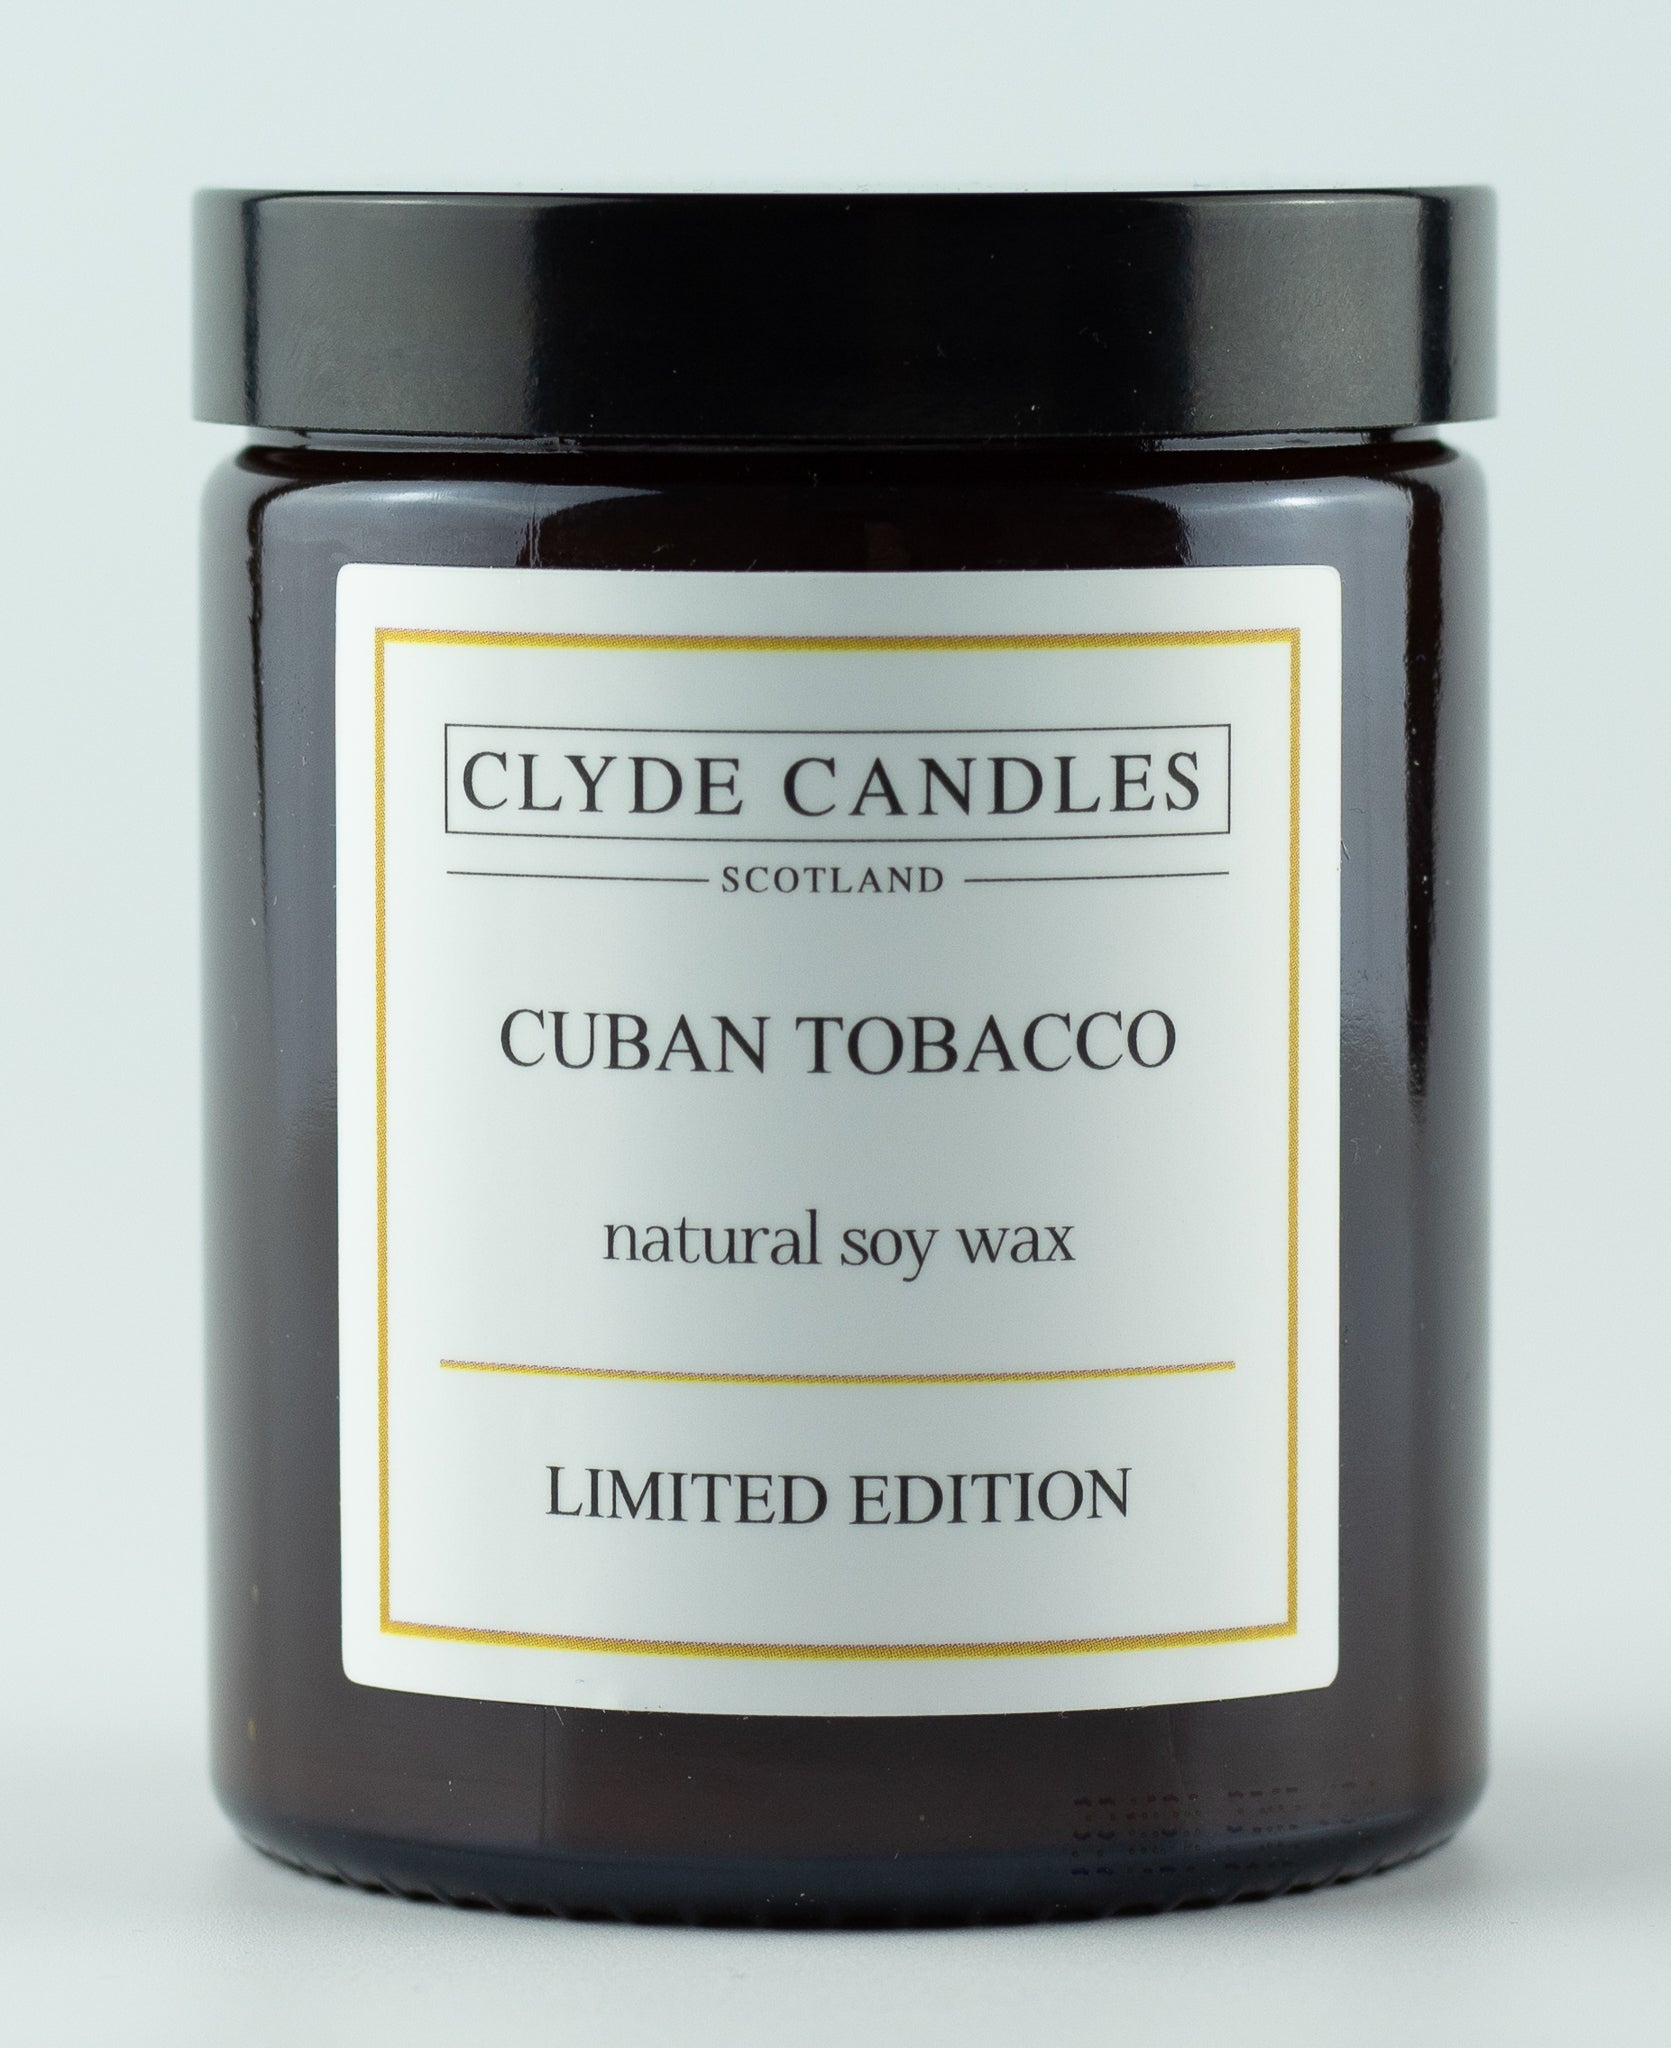 Cuban Tobacco Amber Glass, natural soy wax, clyde candles, hand made in scotland, scottish gifts, candle gifts, scented british candle gifts